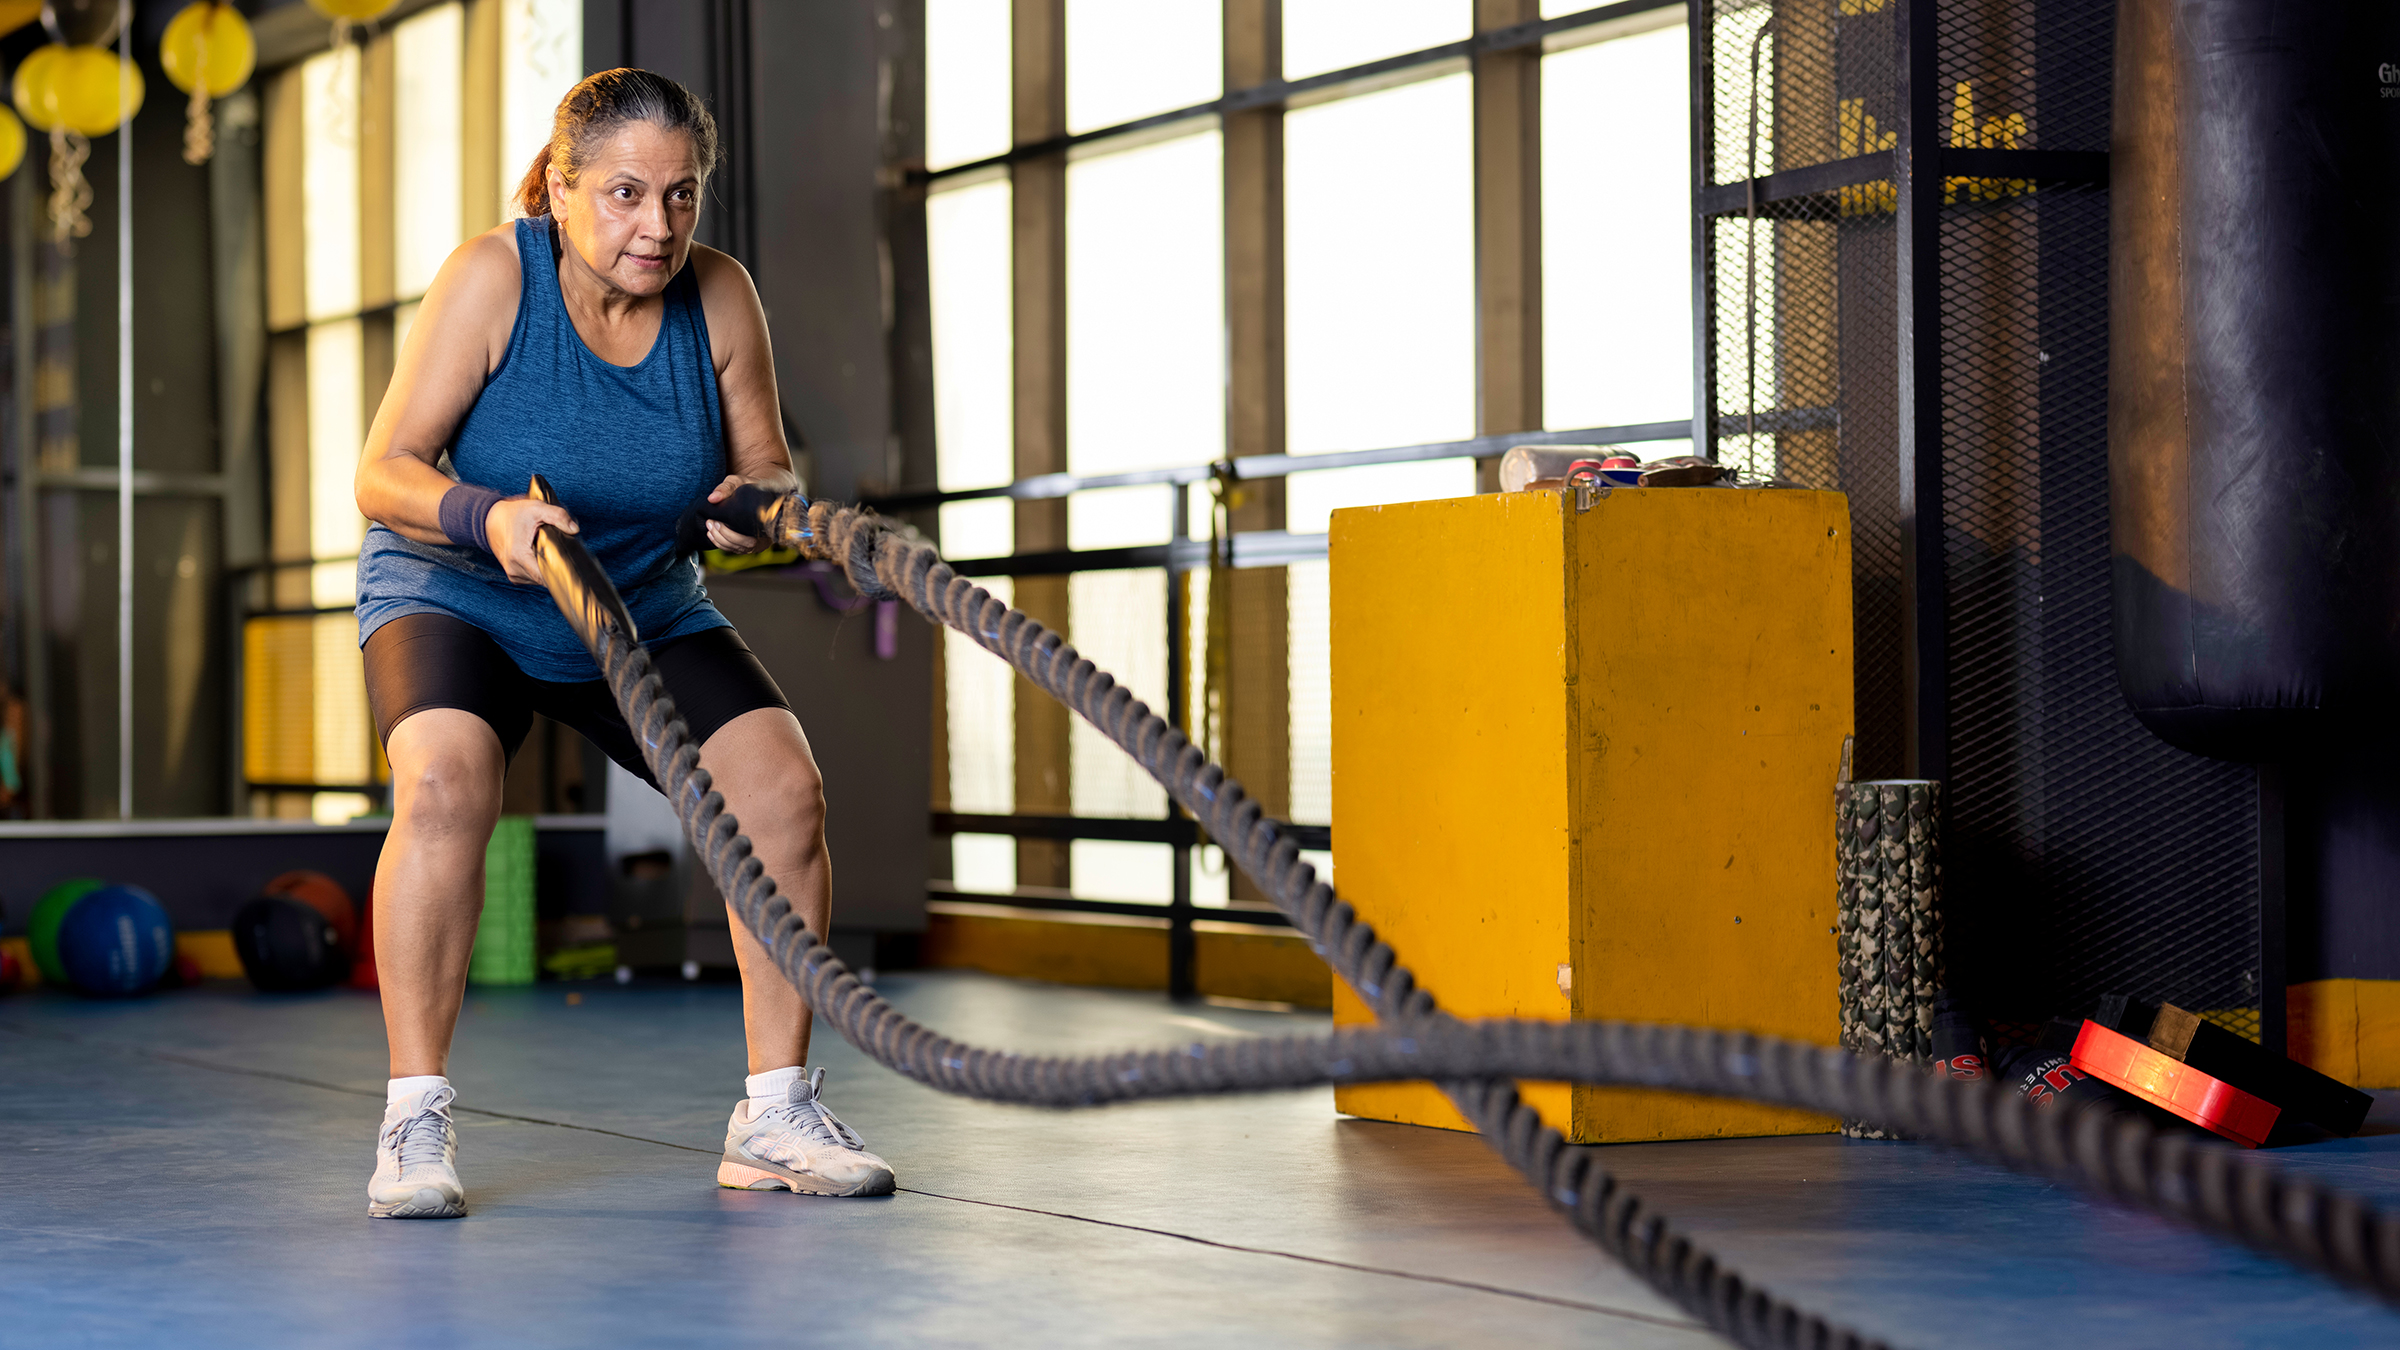 Battle Ropes: What They Are, Their Benefits and Exercises You Can